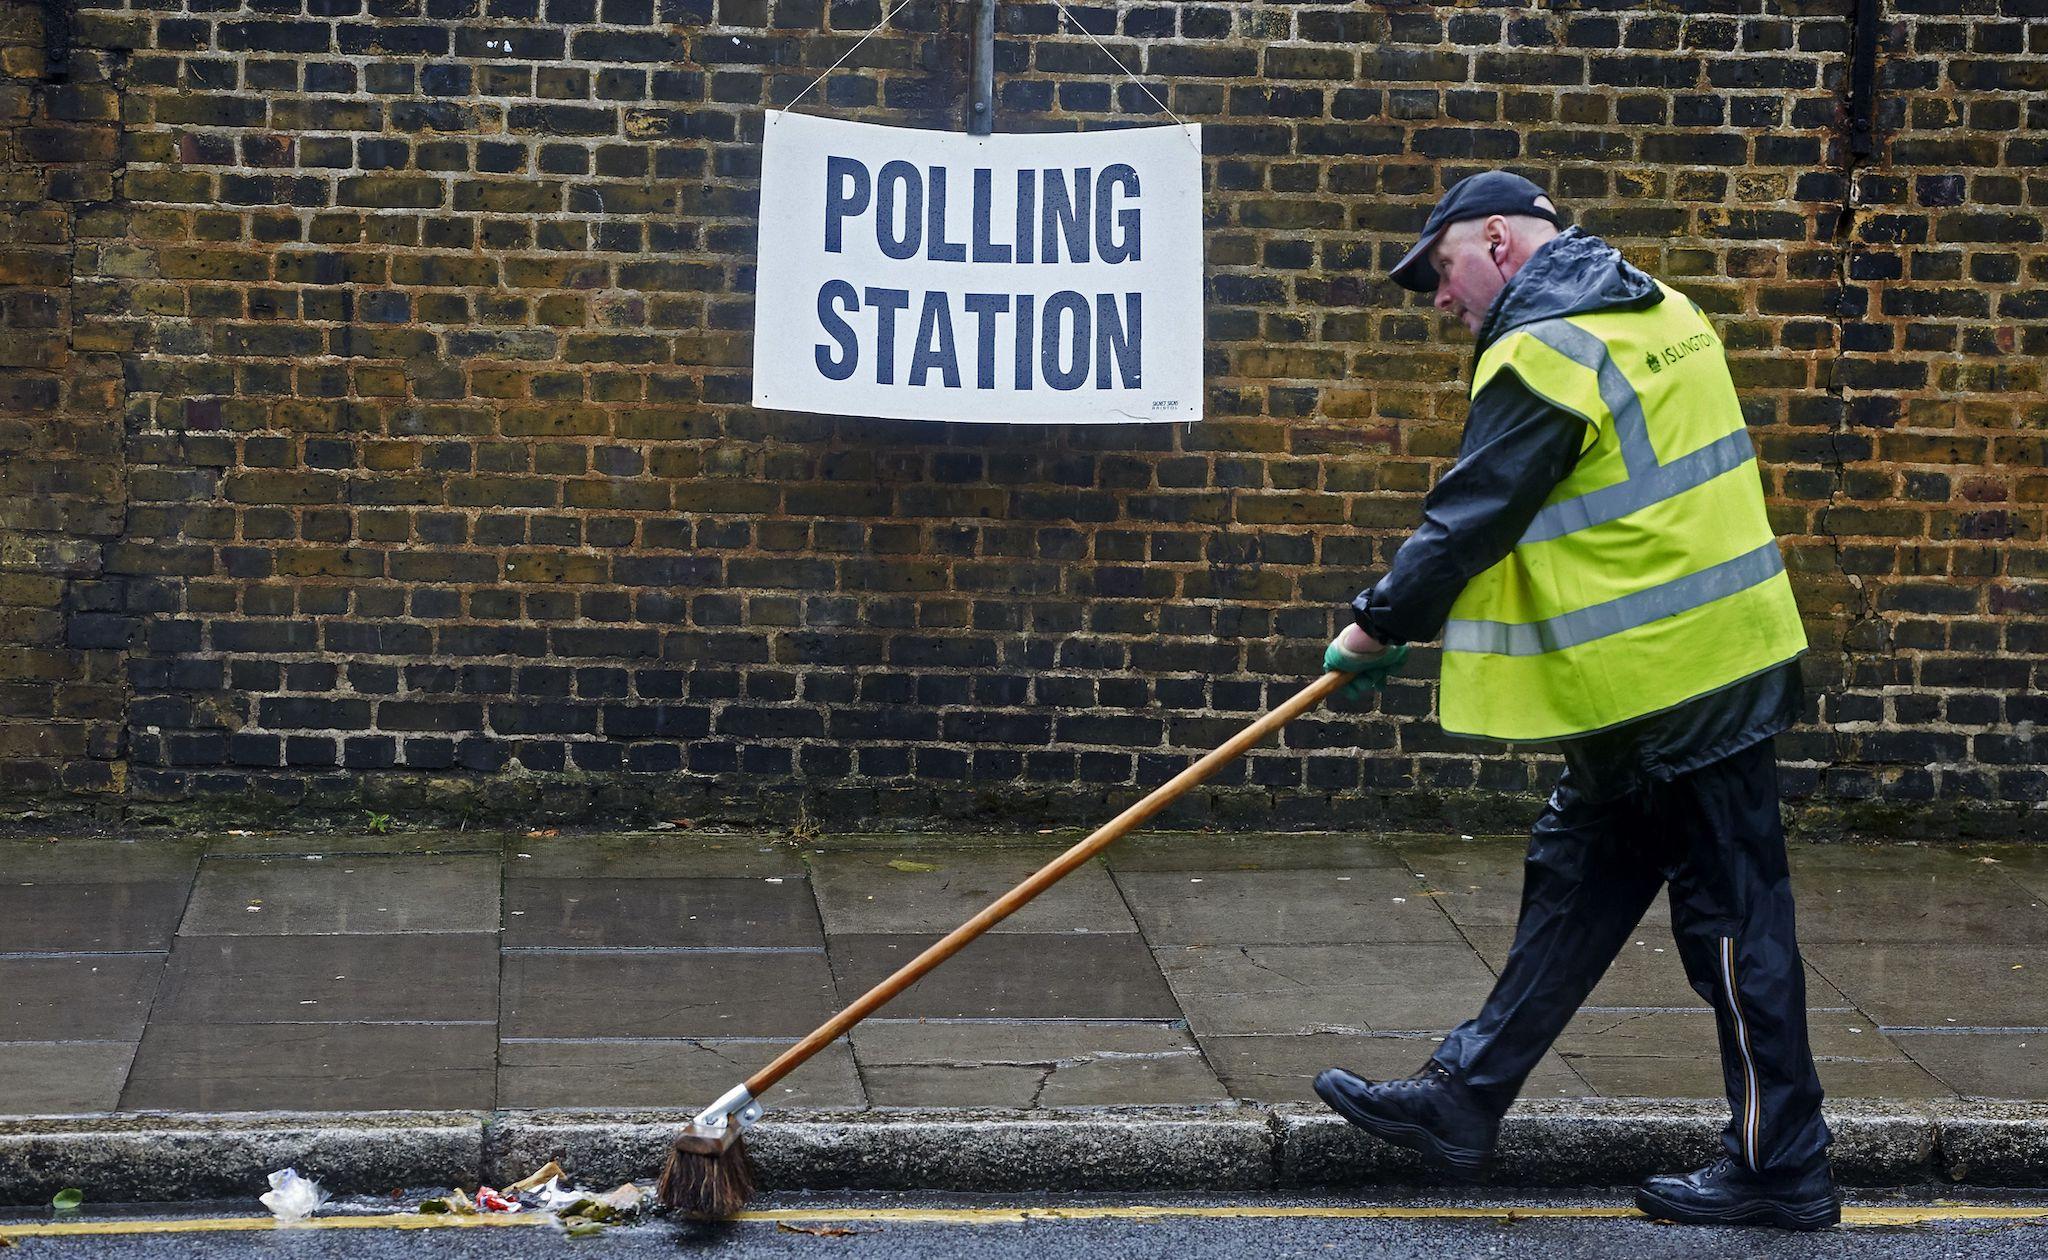 A worker sweeps rubbish in the raod near a polling station sign in London on June 23, 2016, as Britain holds a referendum on wether to stay in, or to leave the European Union